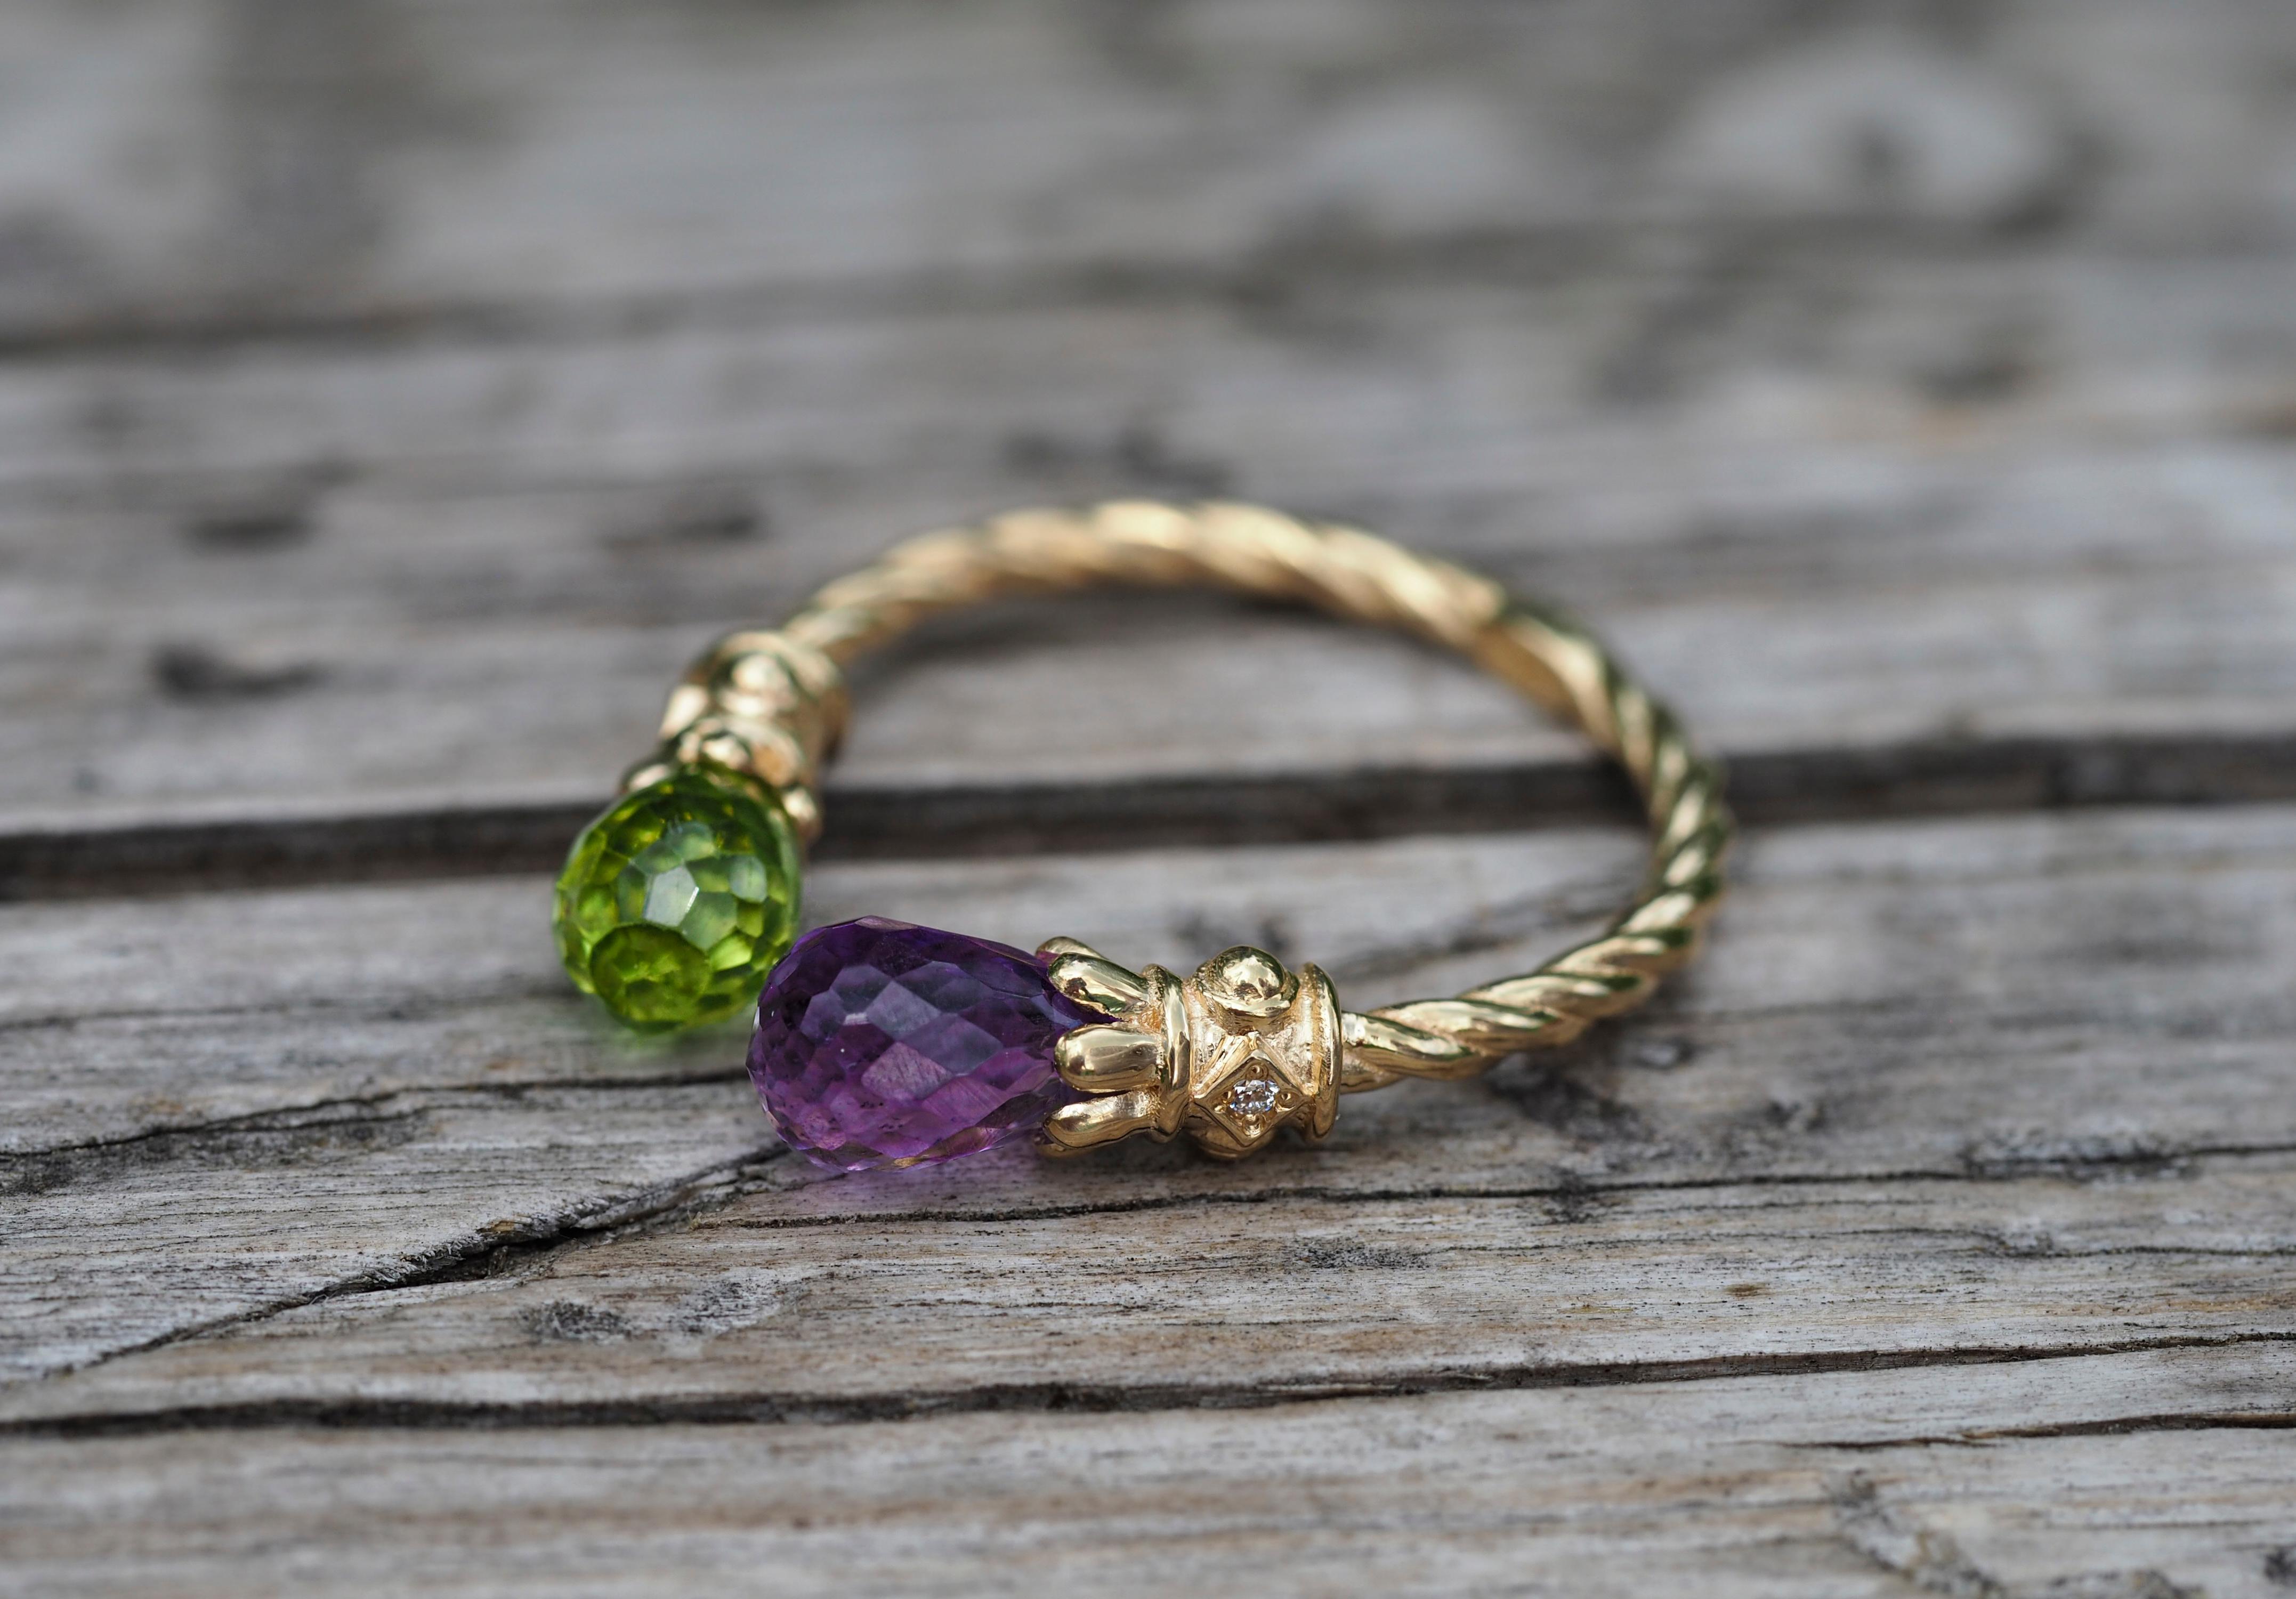 For Sale:  14k Gold Ring with Peridot, Amethyst and Diamonds 12